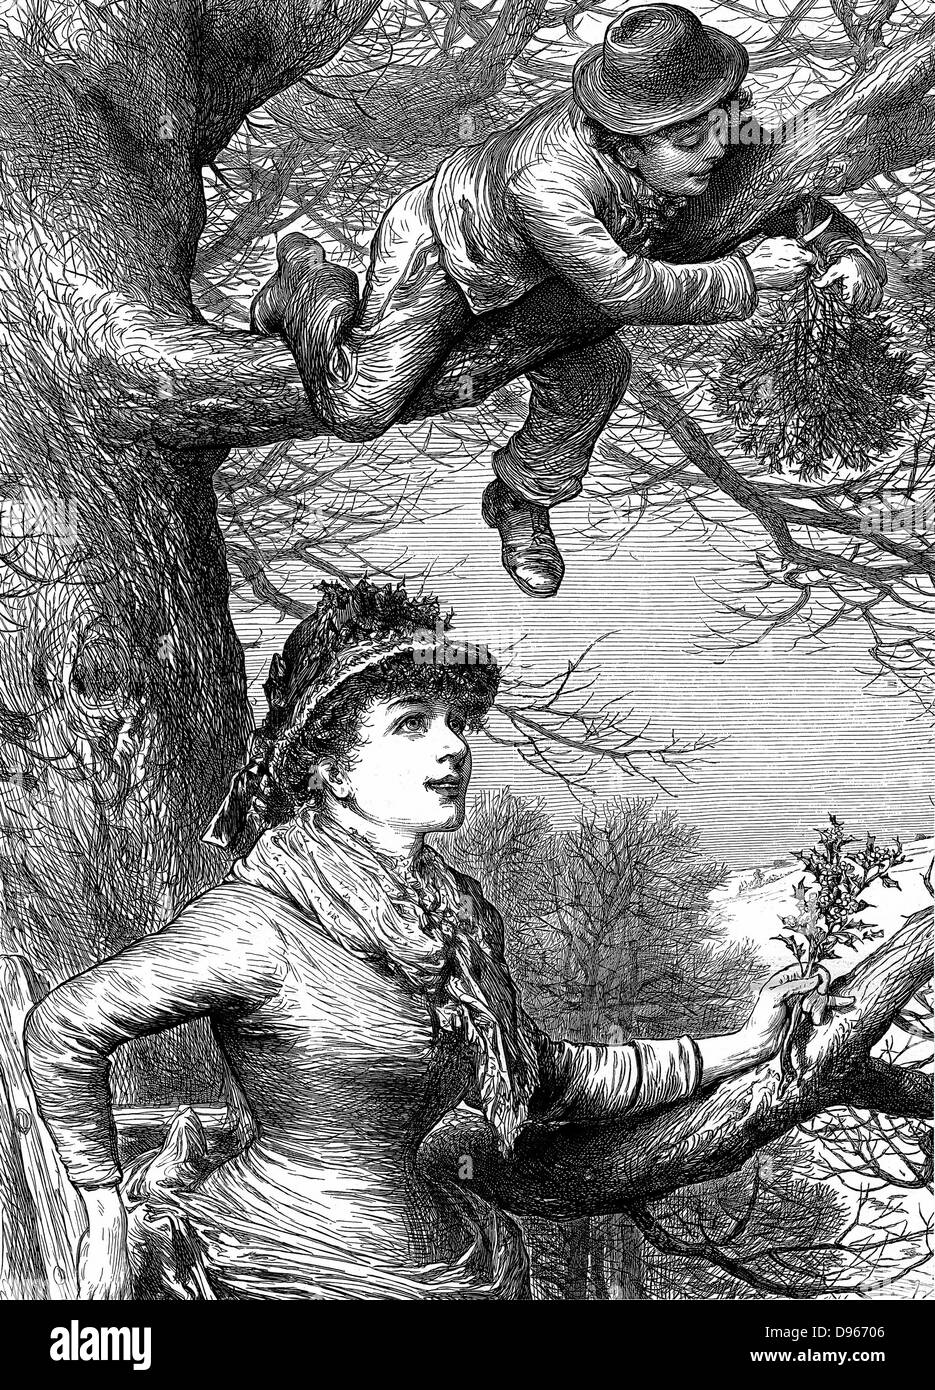 Cutting the Mistletoe Bough for Christmas decoration. Wood engraving, 1886. Stock Photo